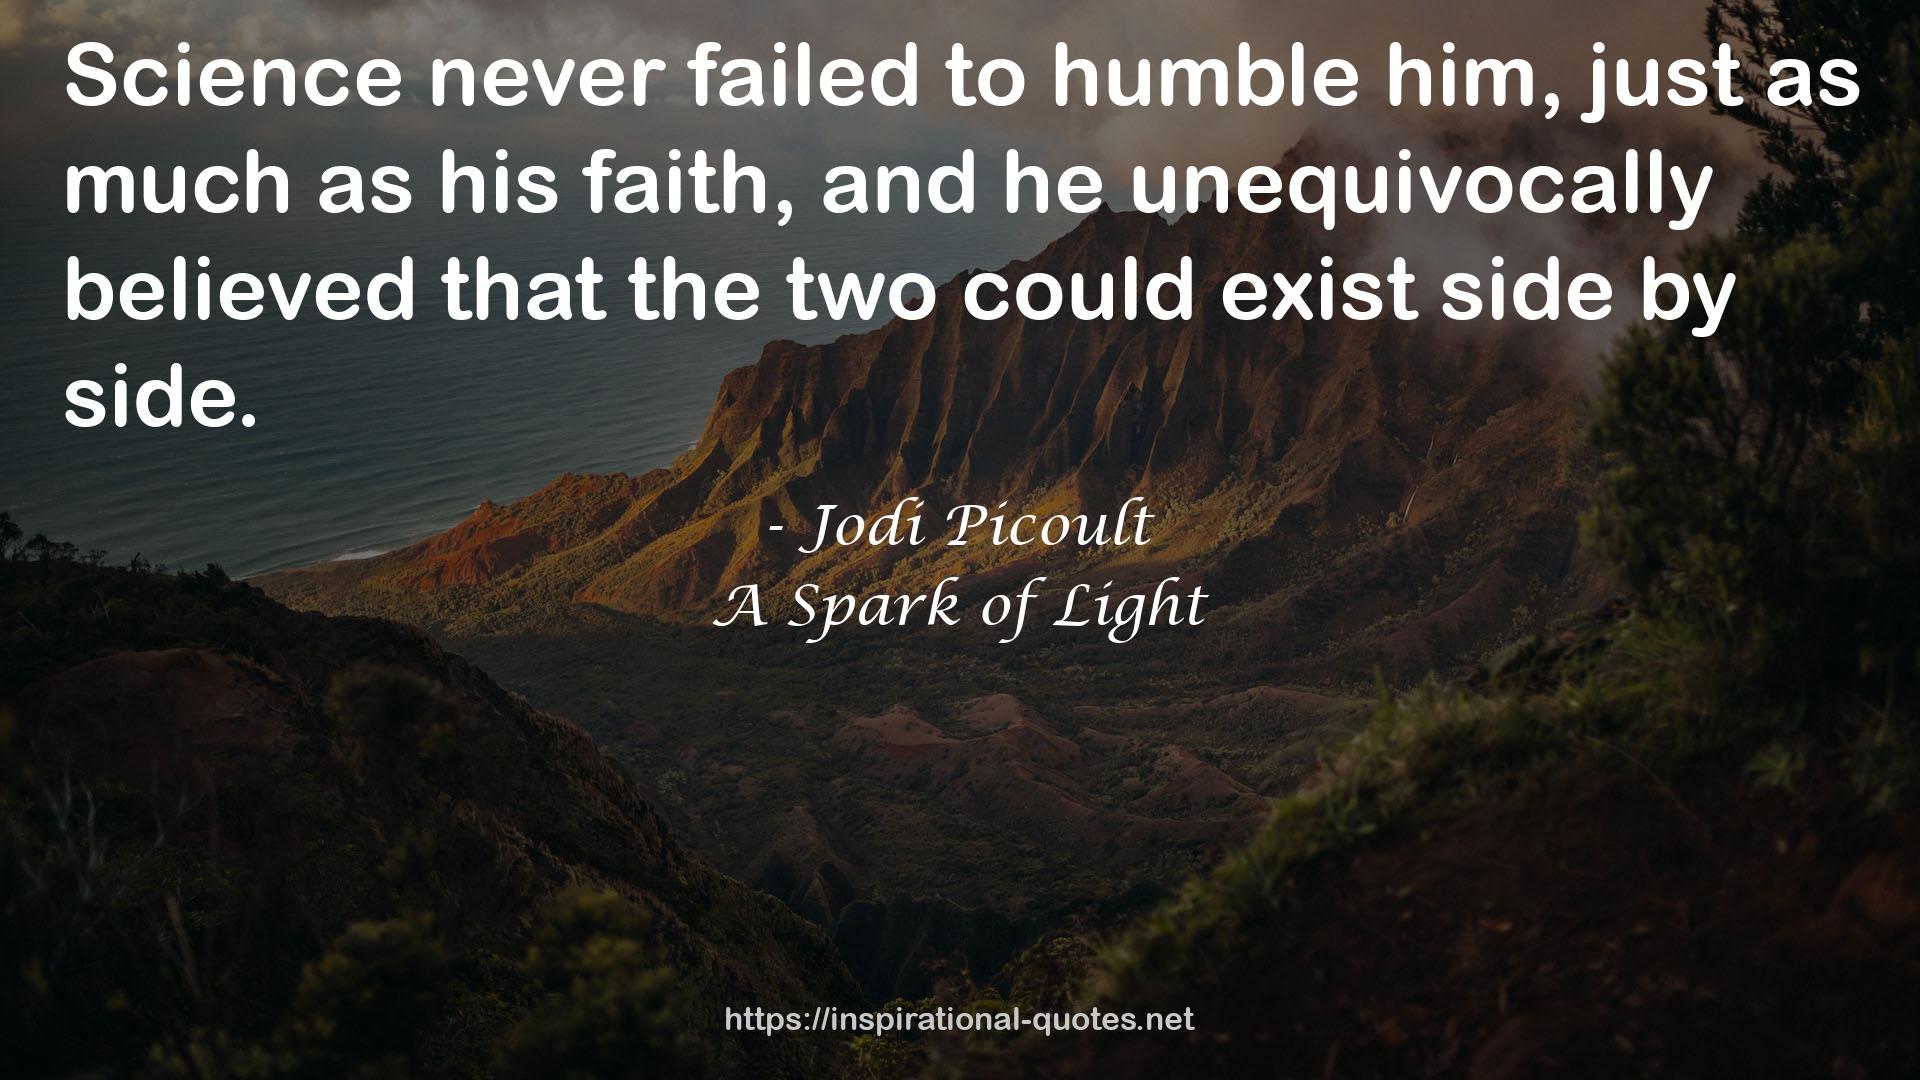 A Spark of Light QUOTES